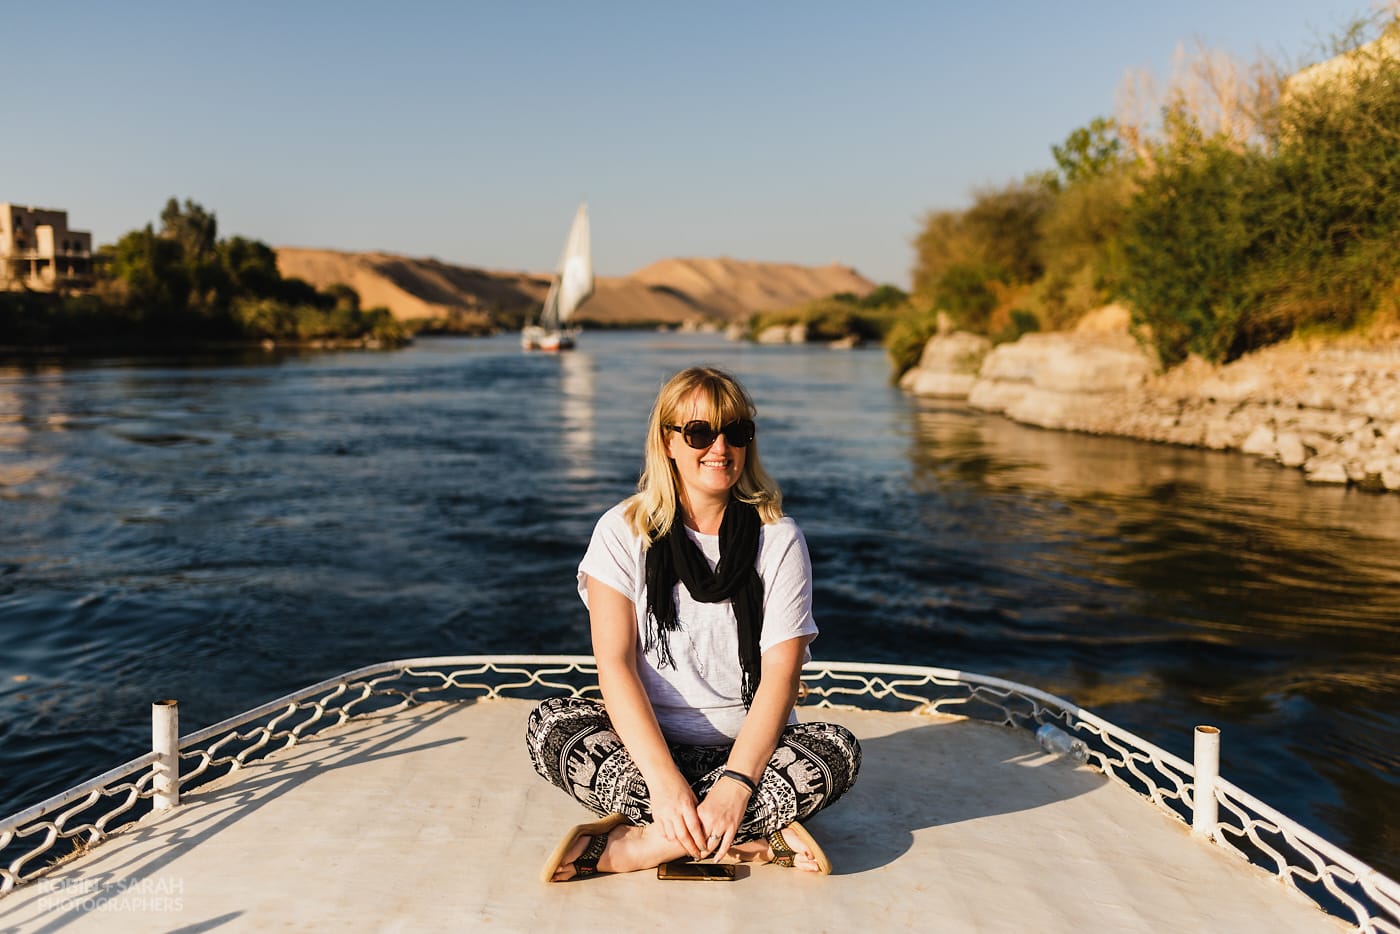 On the River Nile